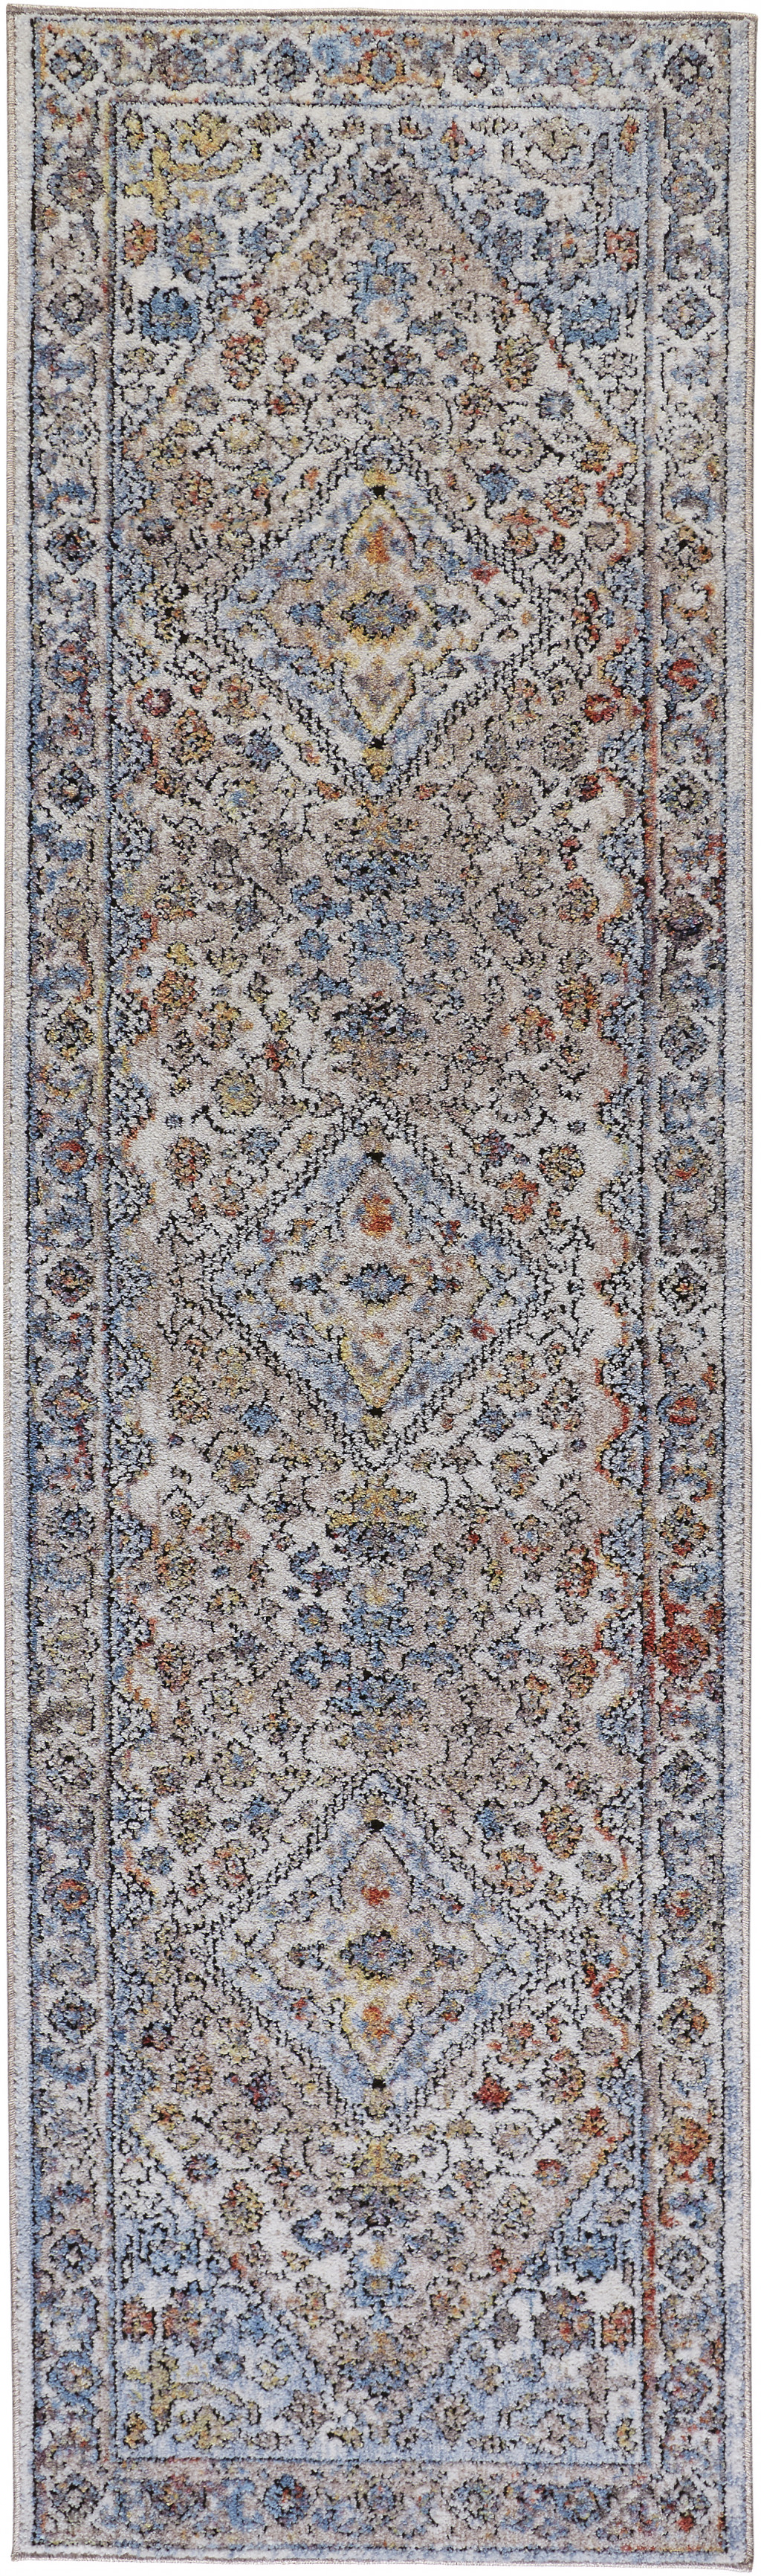 8' Taupe Blue And Gray Floral Stain Resistant Runner Rug-512306-1